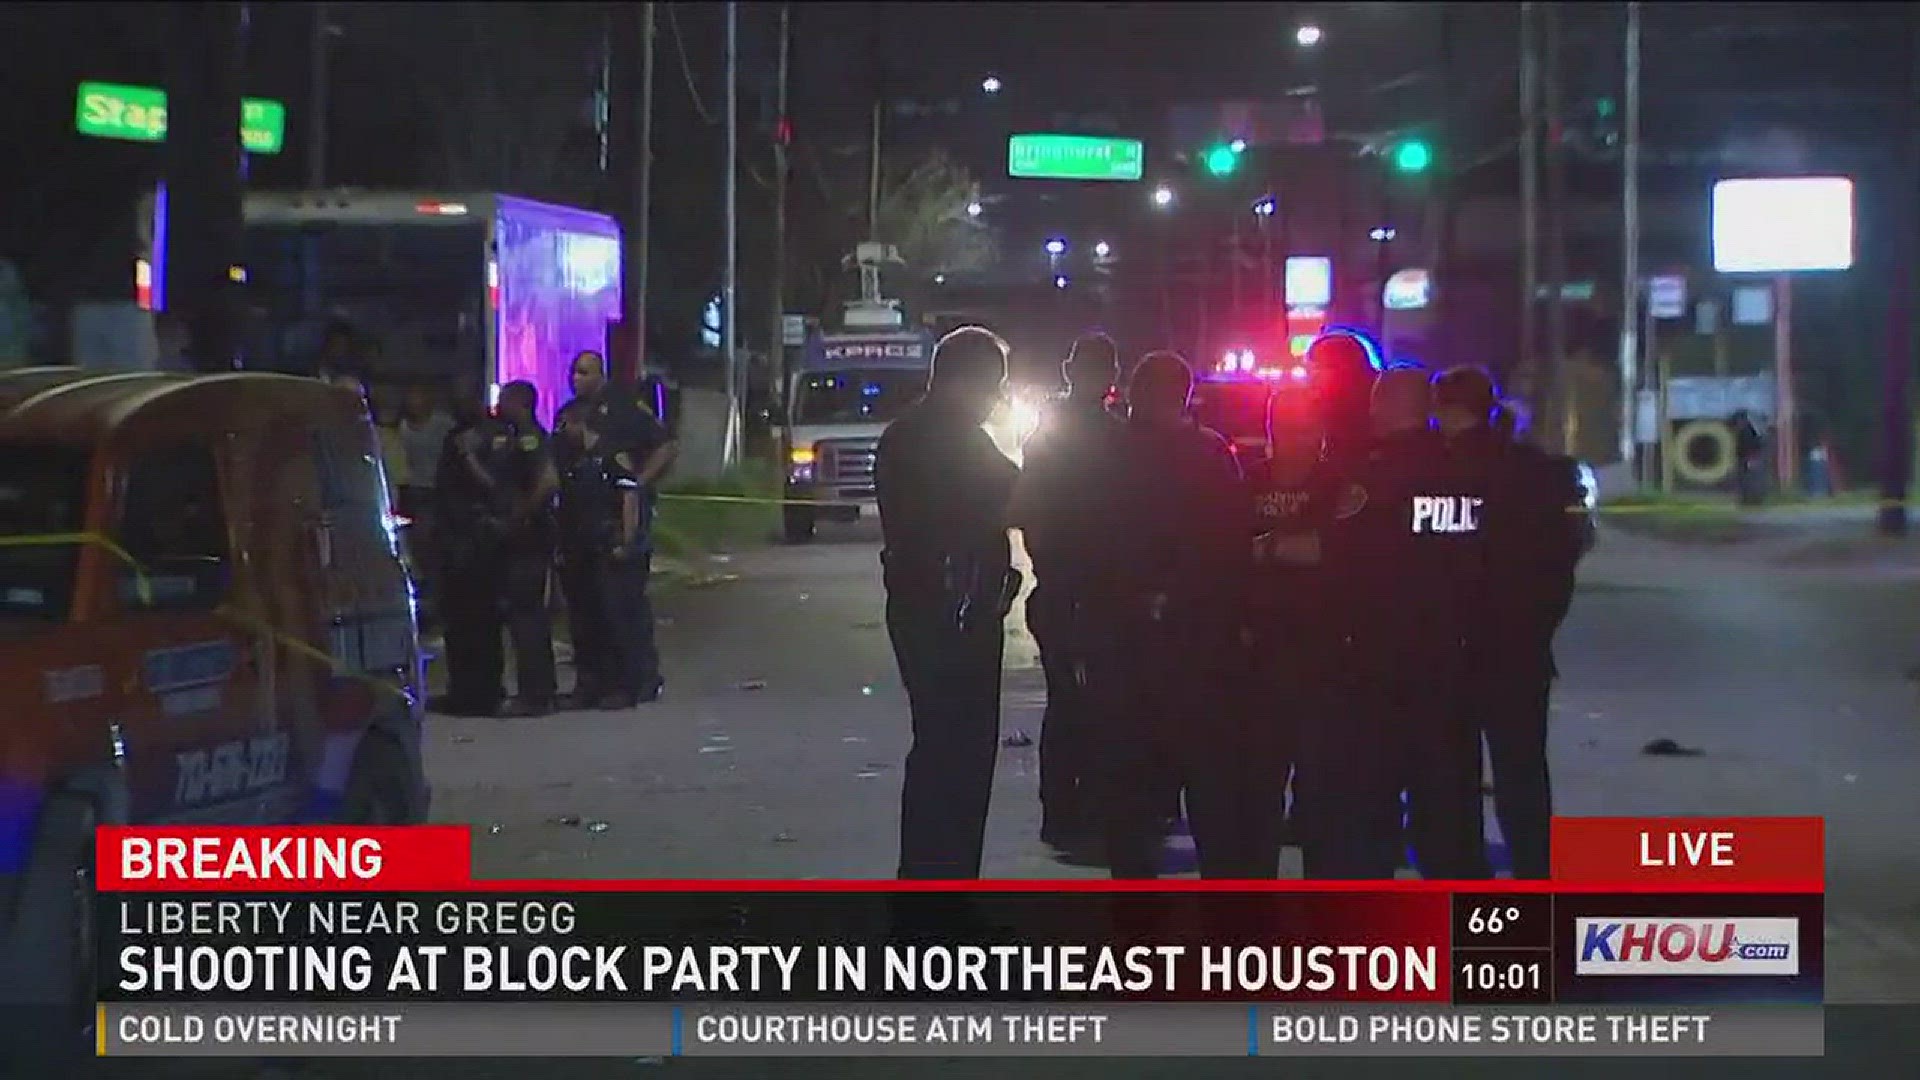 Two people were shot at a block party for a local rapper in northeast Houston Sunday evening, according to Houston Police.